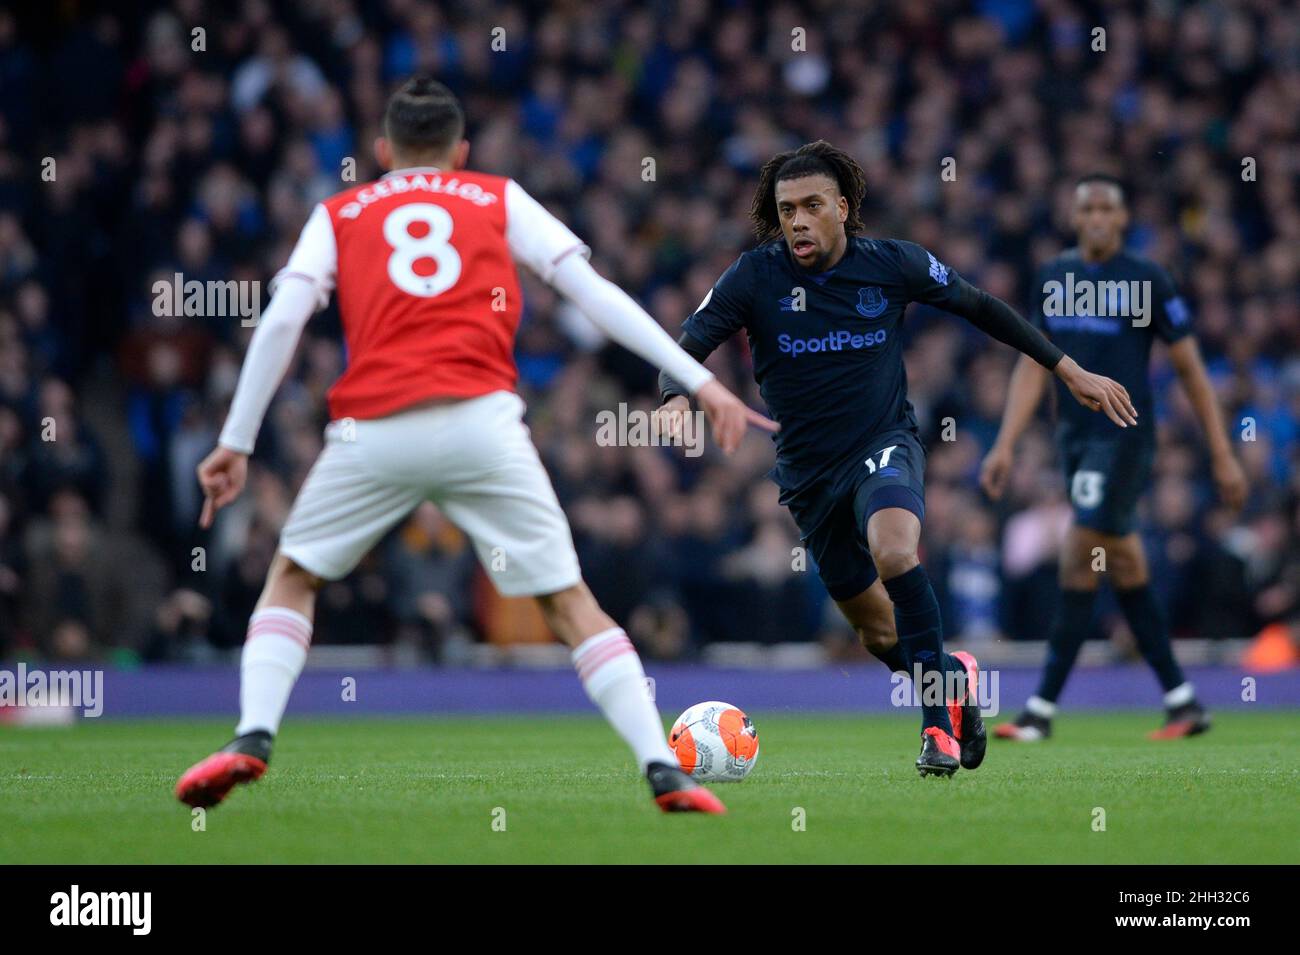 Alex Iwobi of Everton in action during the Premier League match between Arsenal and Everton at the Emirates Stadium in London, UK - 16th February 2020 Stock Photo